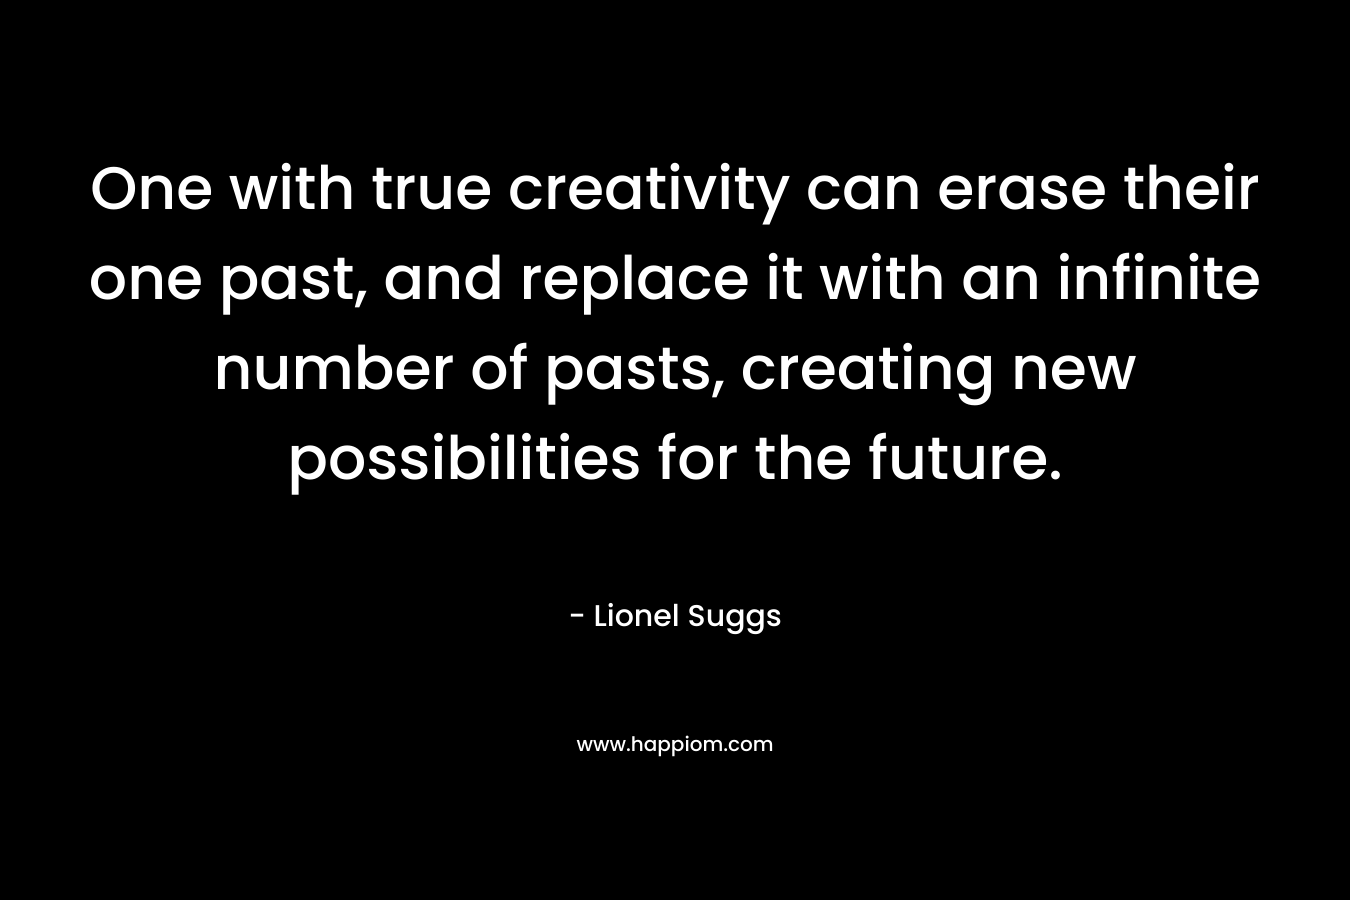 One with true creativity can erase their one past, and replace it with an infinite number of pasts, creating new possibilities for the future.